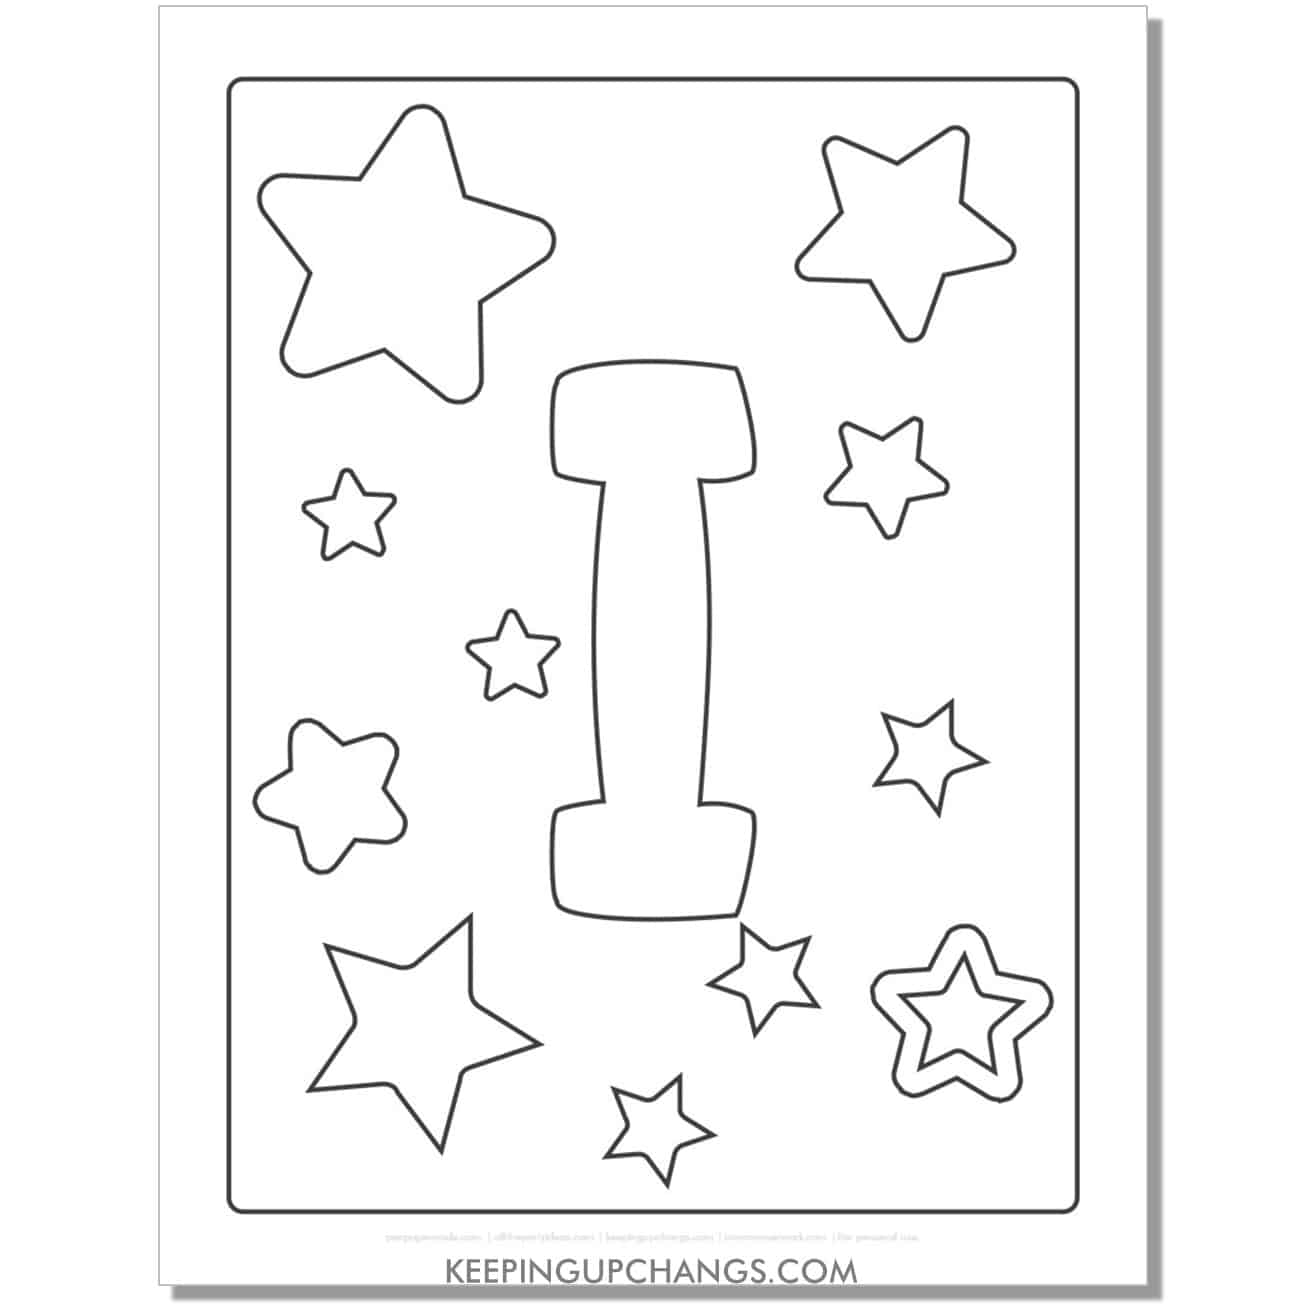 cool letter i to color with stars, space theme.